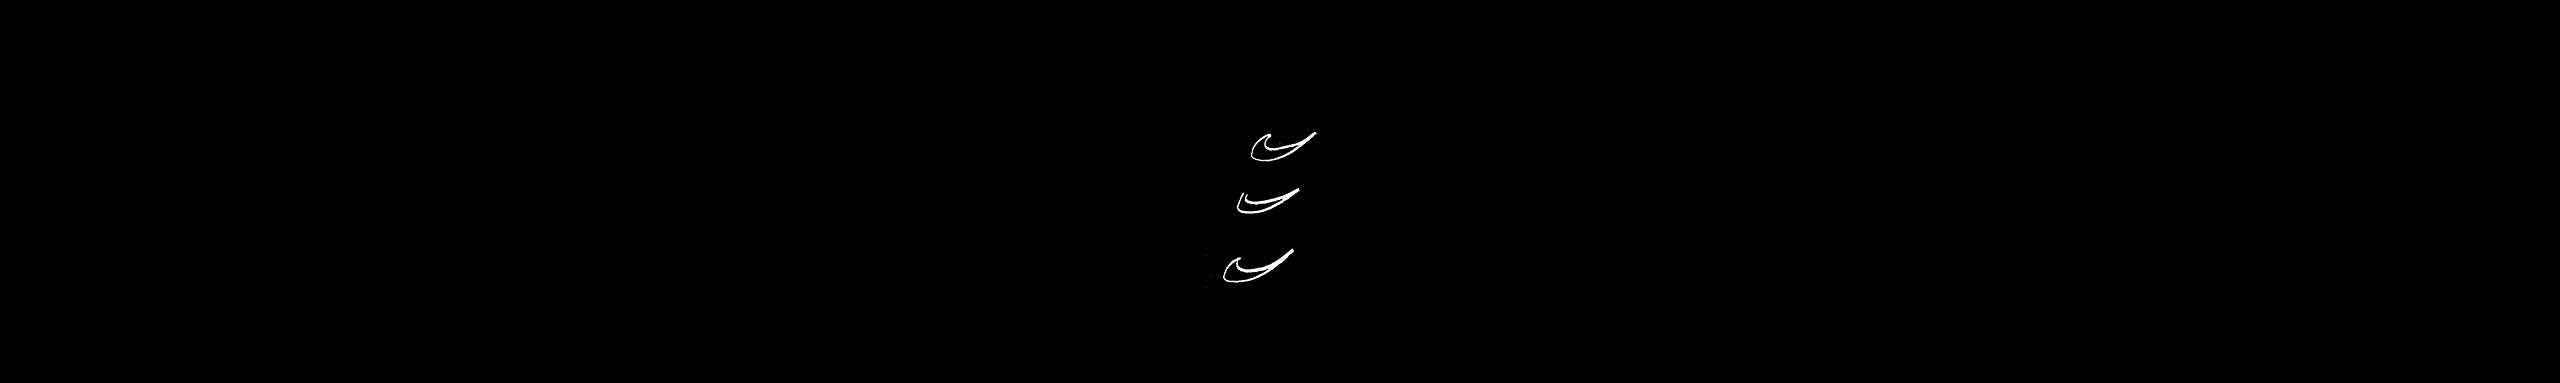 Swooshes_End